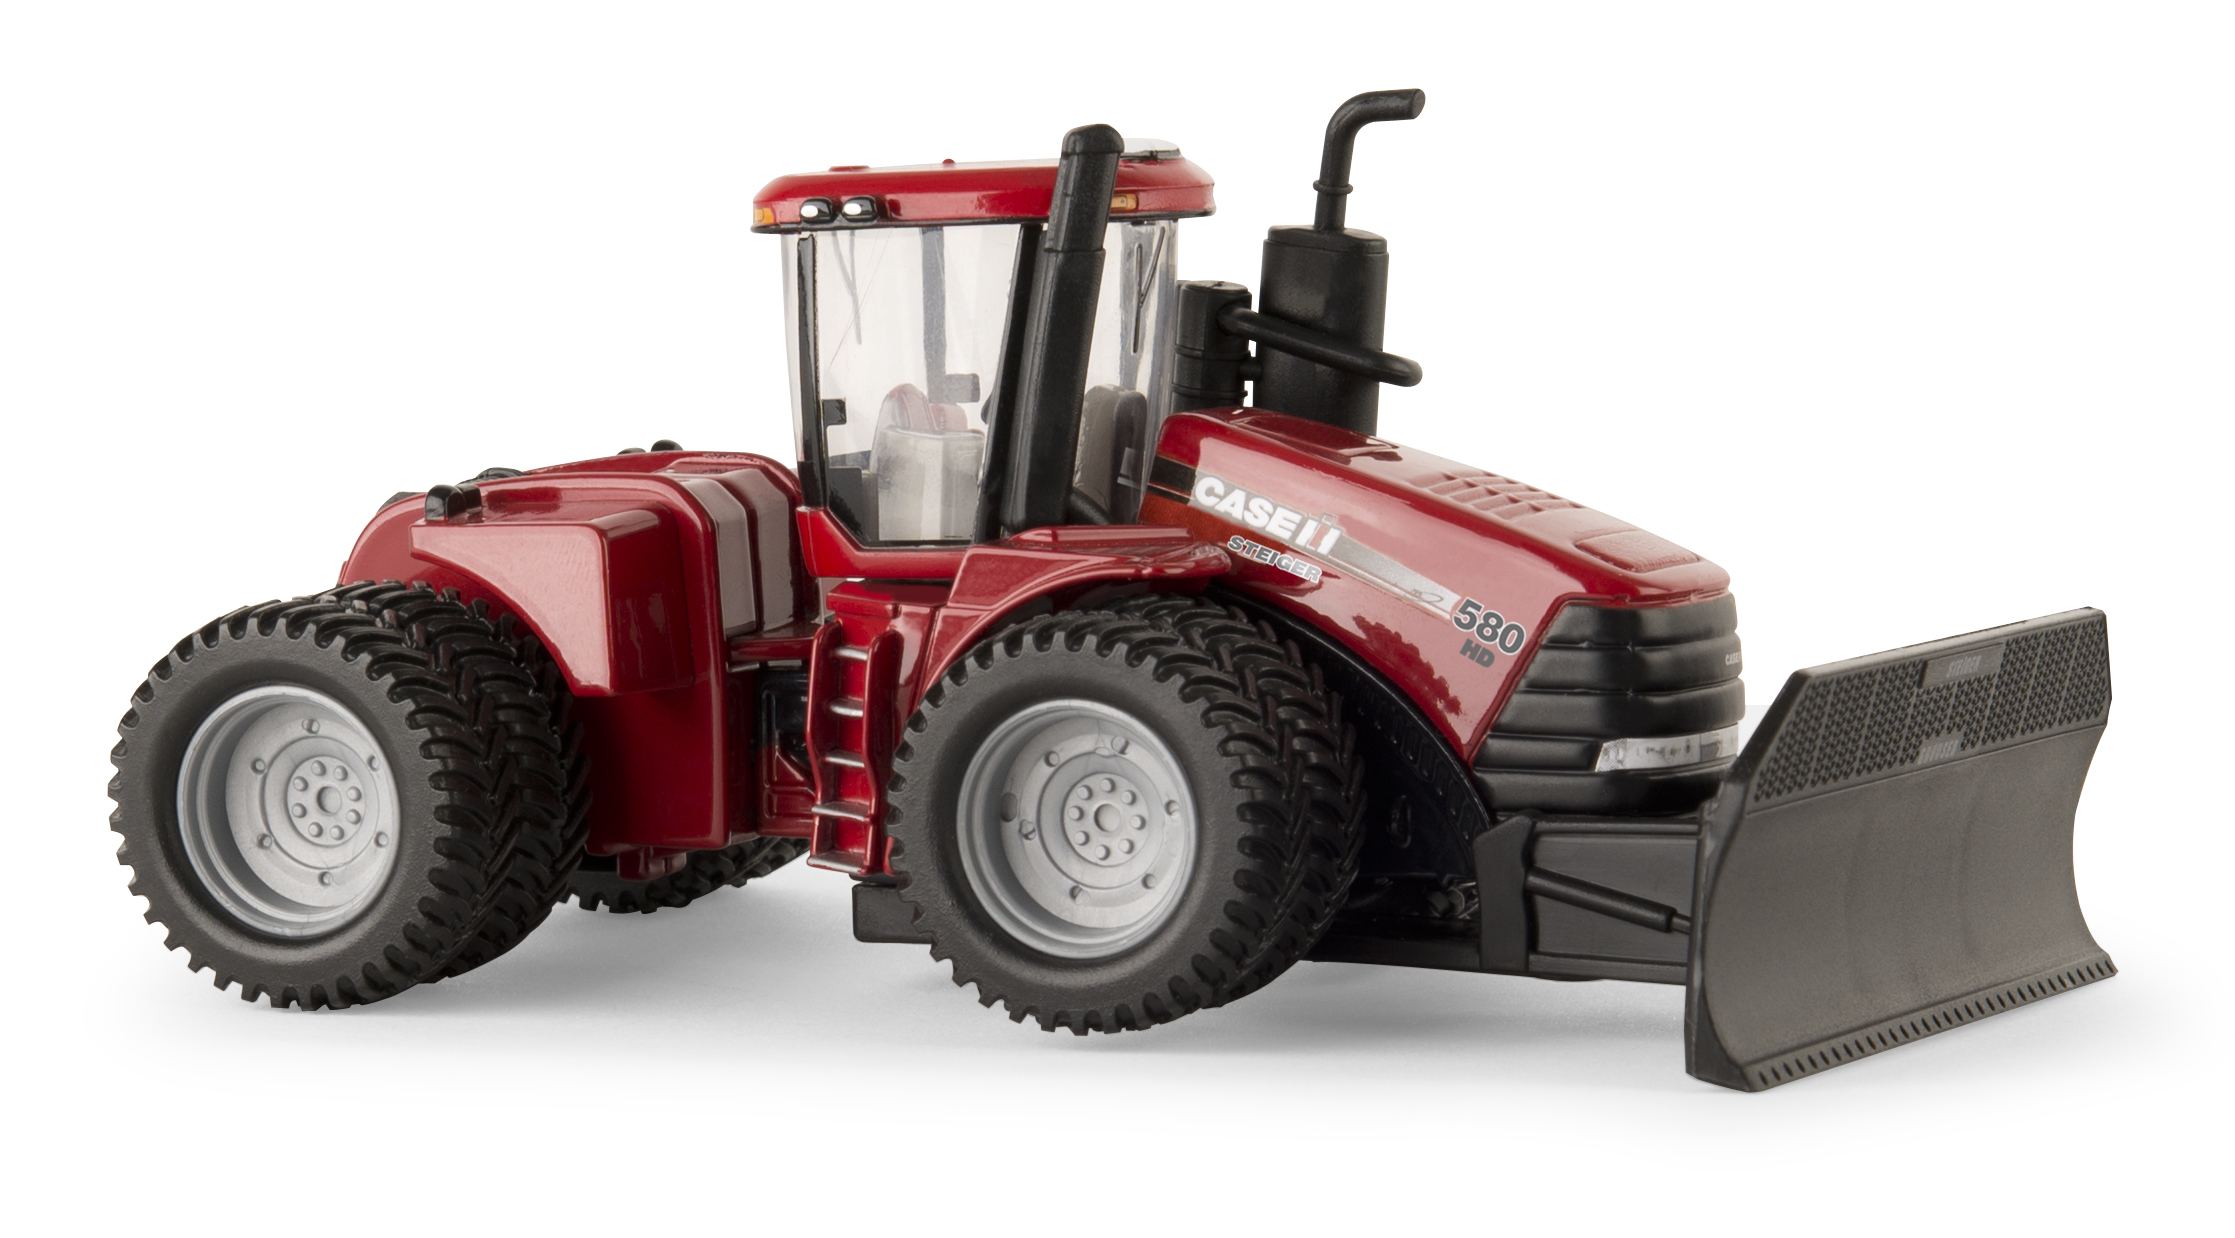 STEIGER 580 TRACTOR WITH GROUSER AG PRO BLADE TOMY 44132 1/32 scale DIECAST CAR 